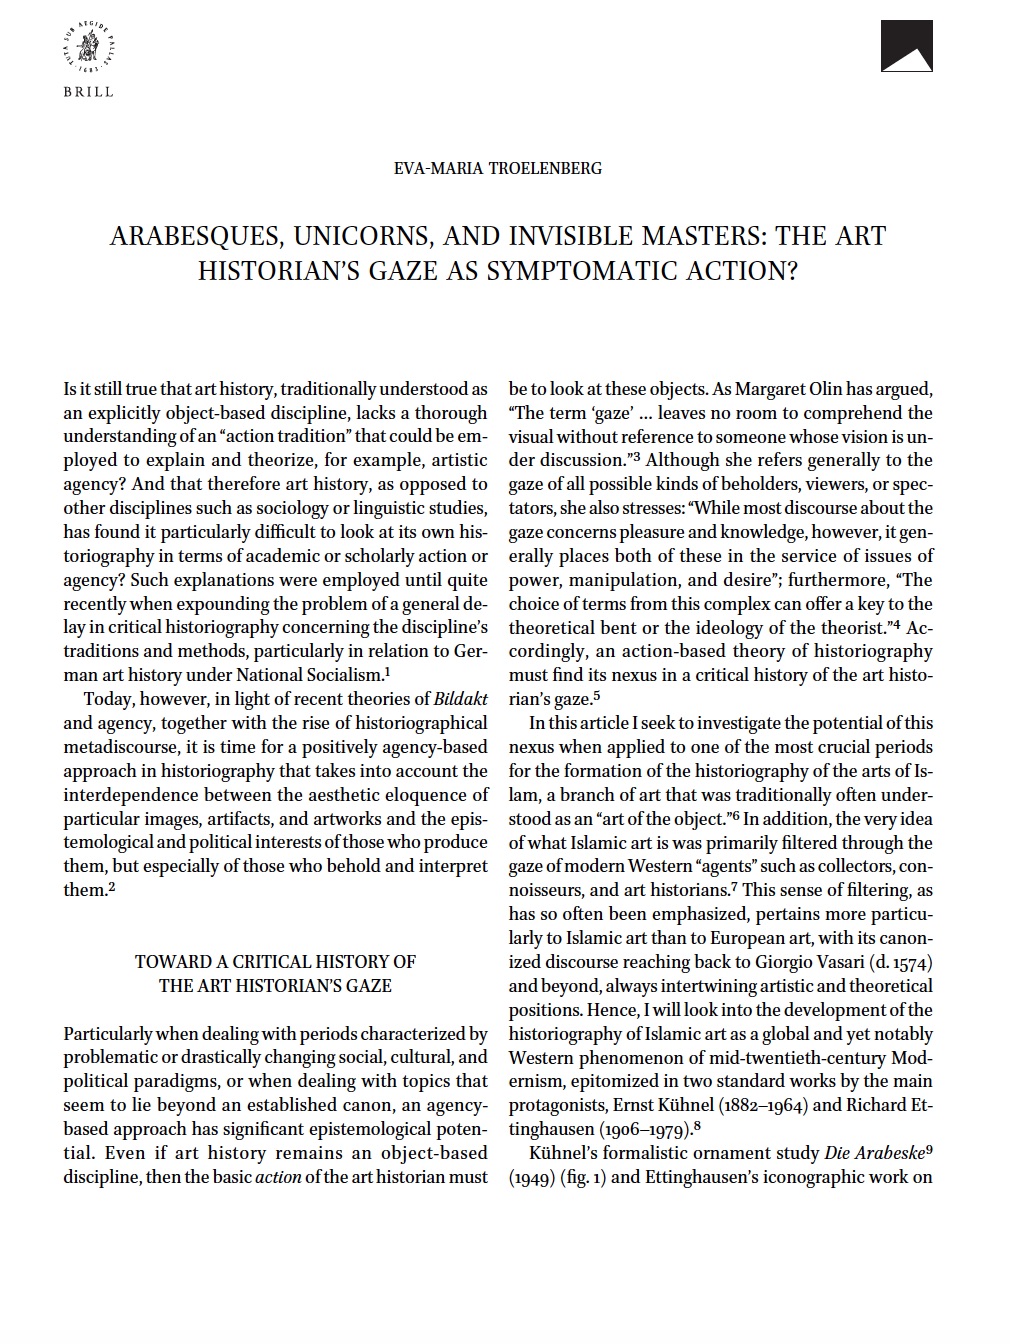 Arabesques, Unicorns, and Invisible Masters: The Art Historian’s Gaze as Symptomatic Action?